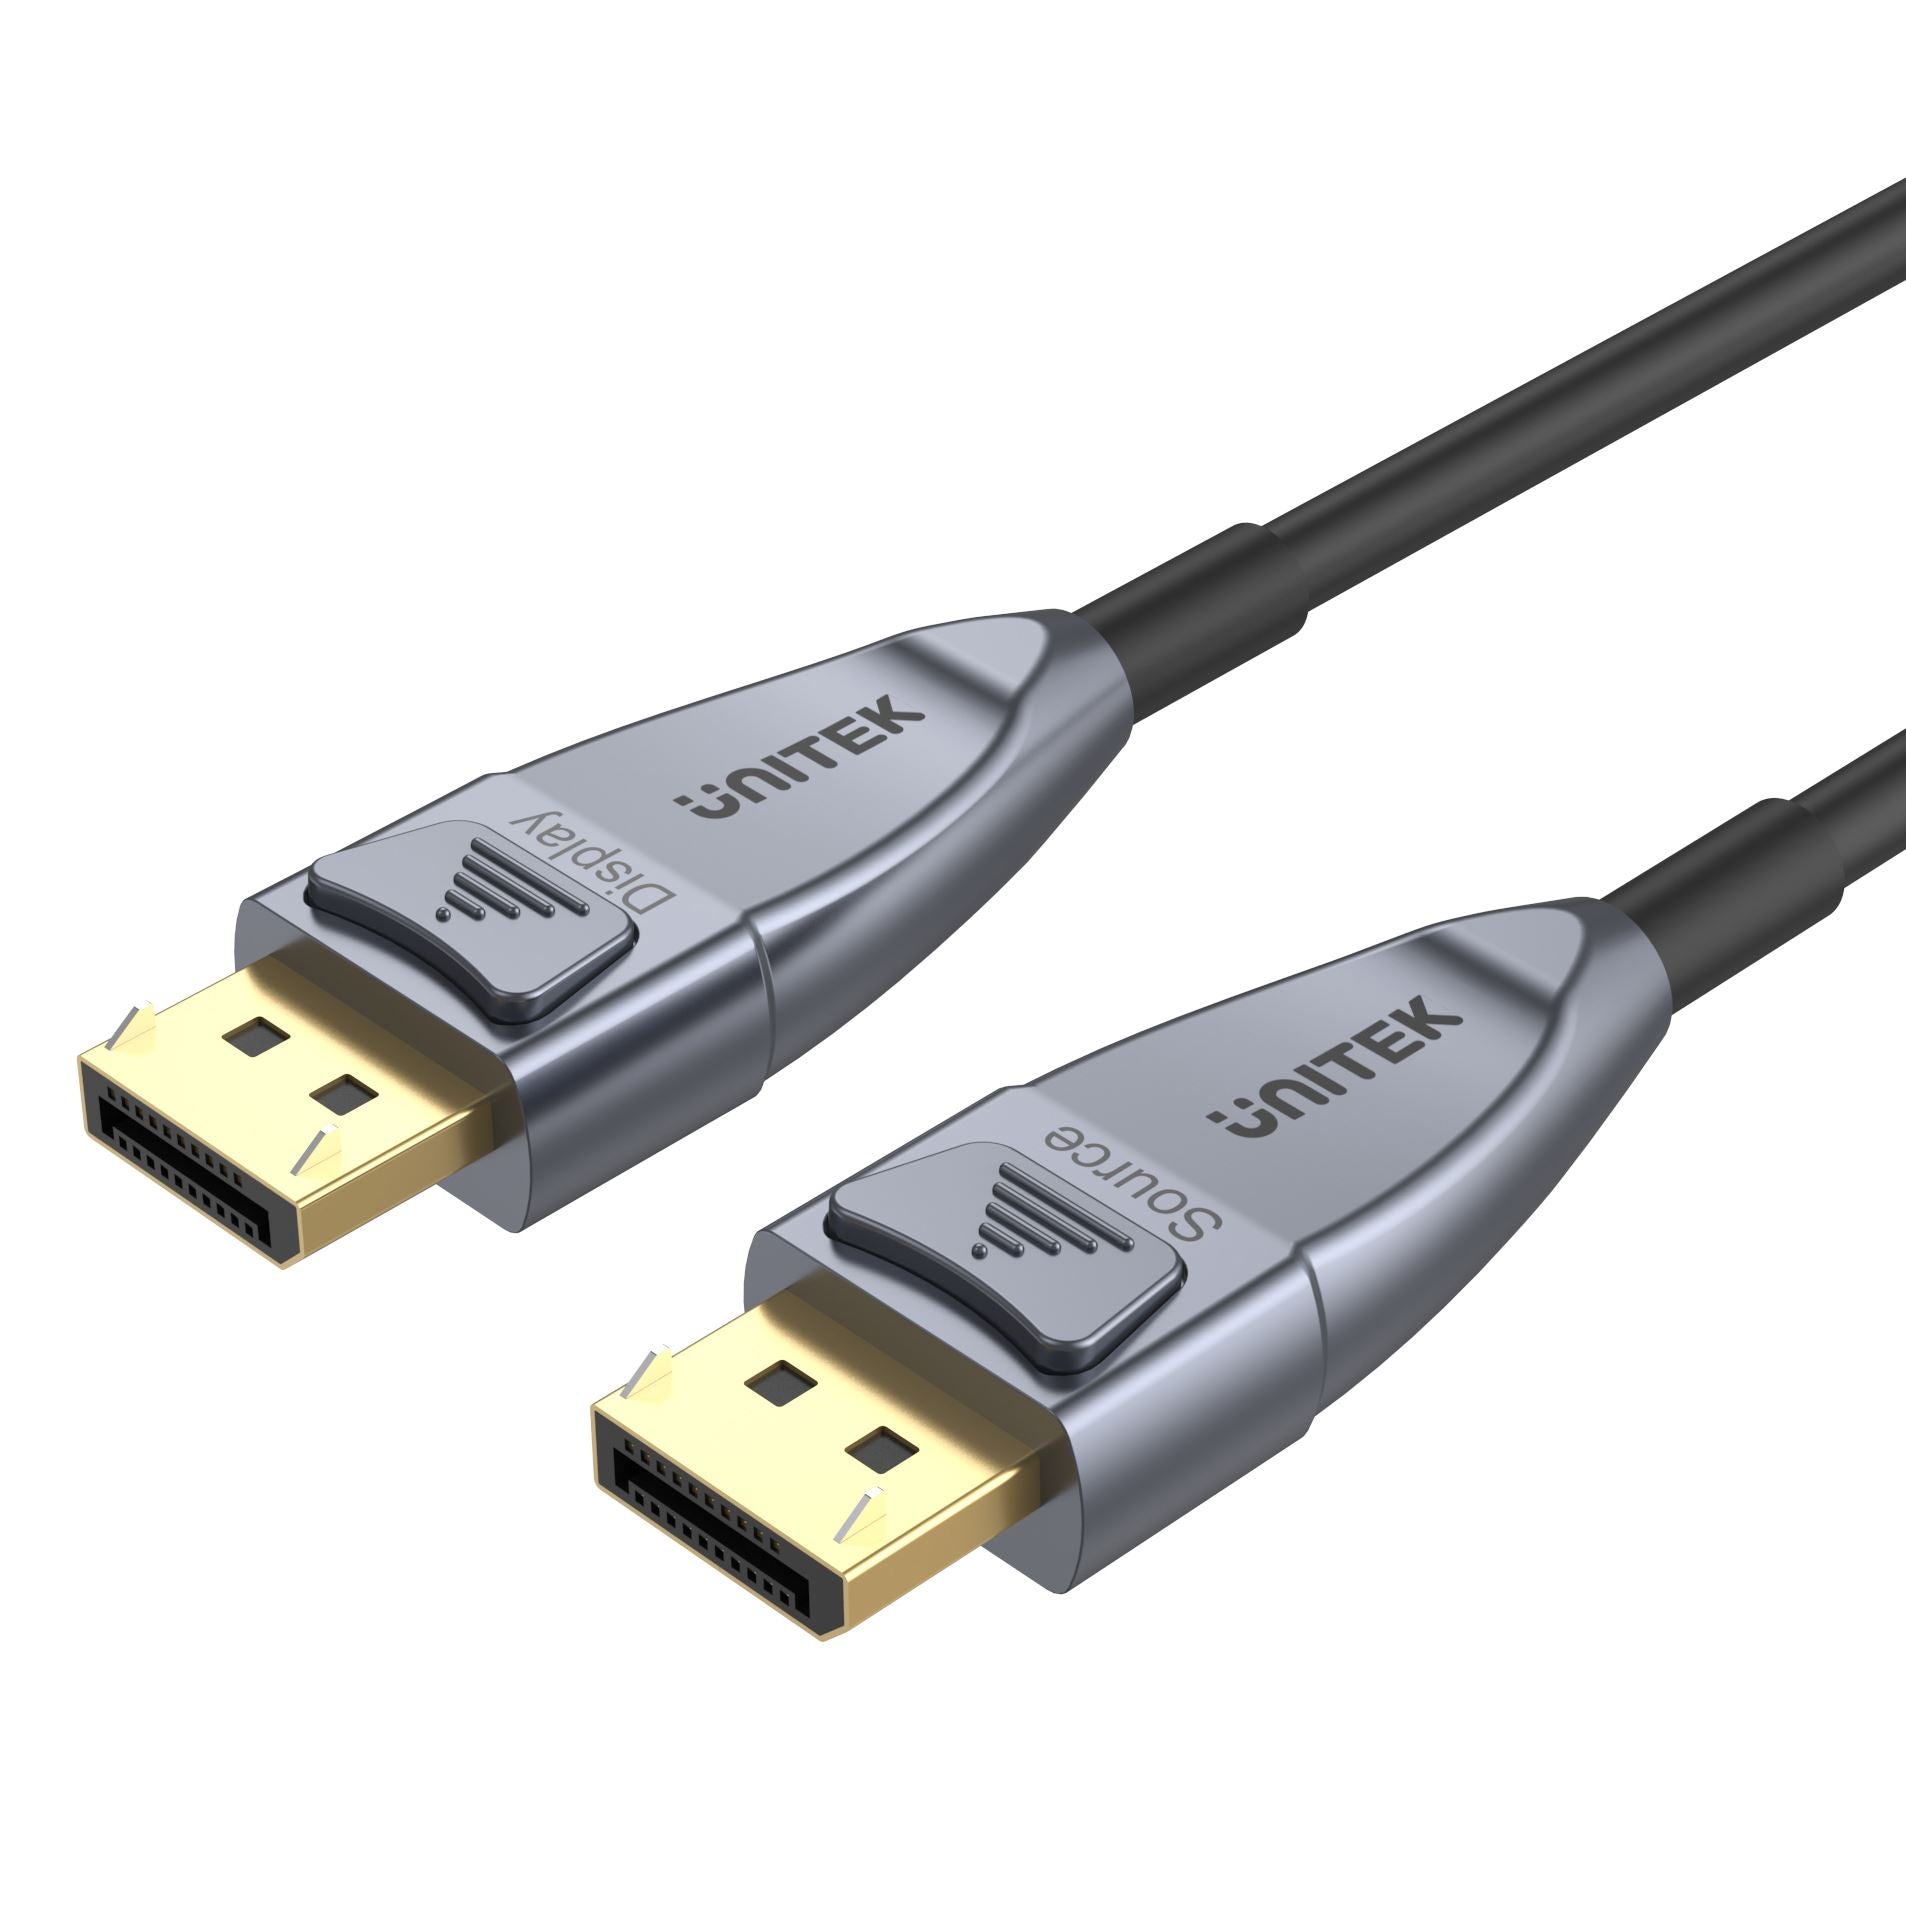 UNITEK_15M_Ultrapro_DisplayPort_Active_Optical_Cable._Supports_Up_to_8K@60Hz_&_4K@120Hz._Long_Distance_A/V_Lossless_Transmission._32.4Gbps_Bandwidth._Space_Grey_+_Black_Colour. 351